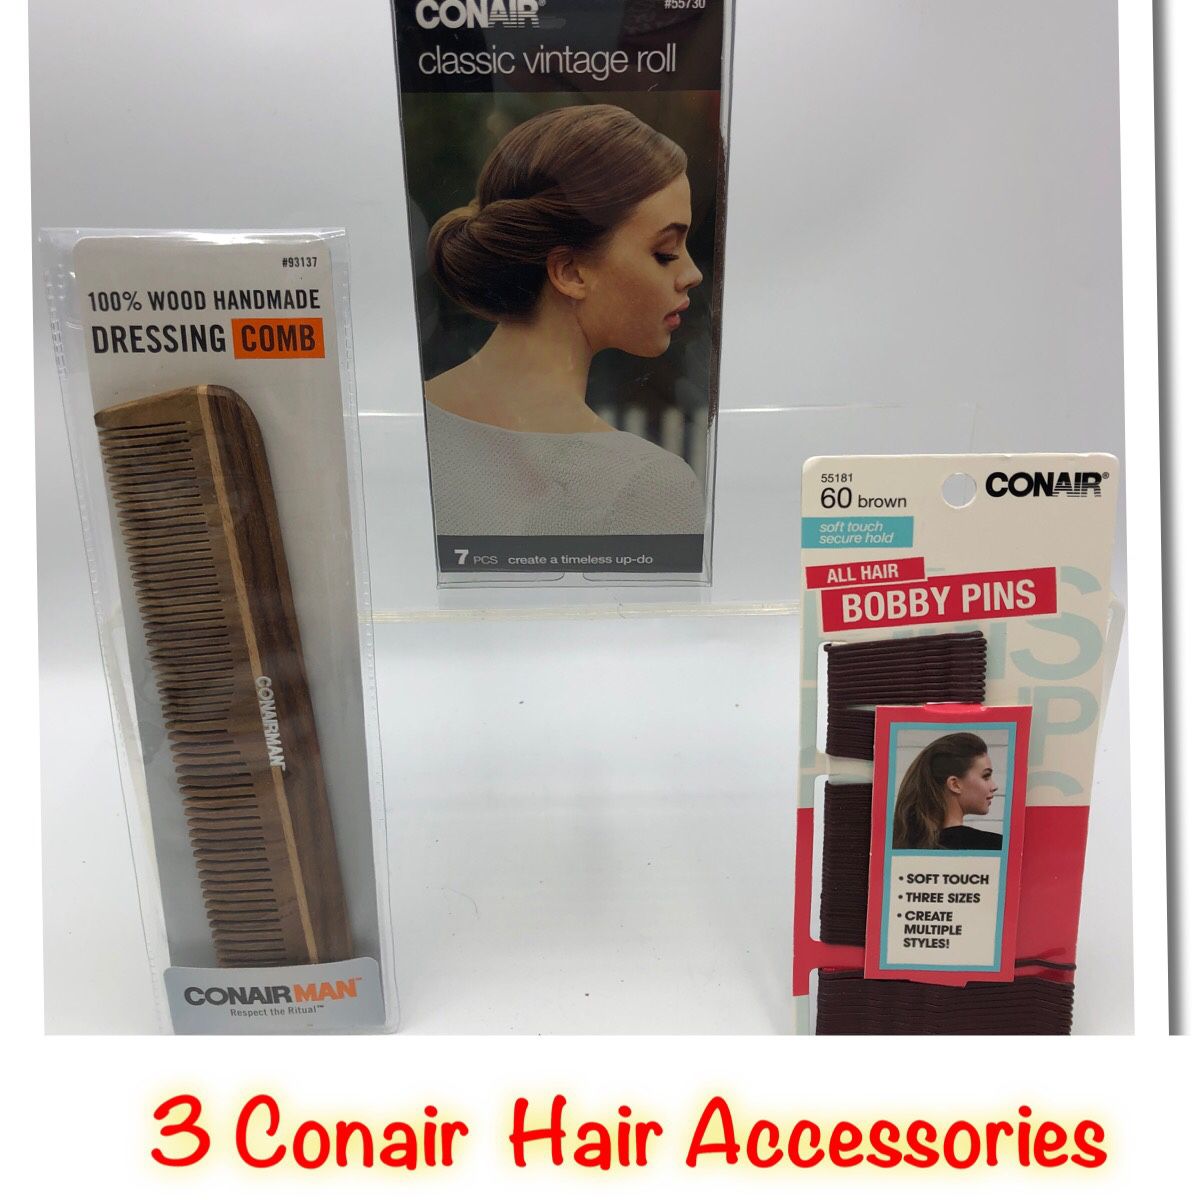 Bundle deal Conair Comb, Classic Vintage Roll & 60 Bobby Pins